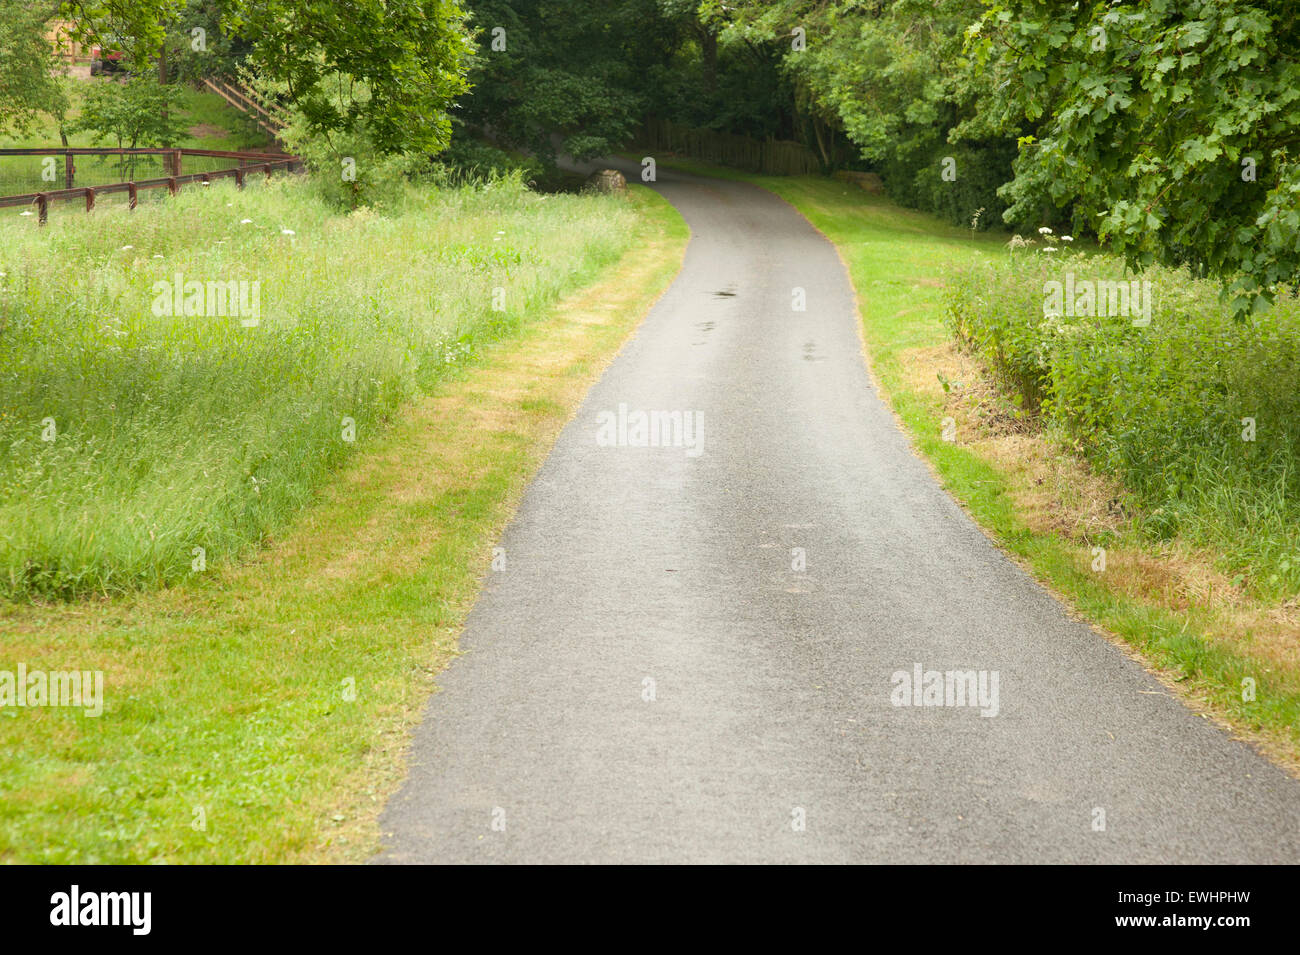 Country lane in  early summer grass lined and tree foliage with wooden rail fence to one side Stock Photo